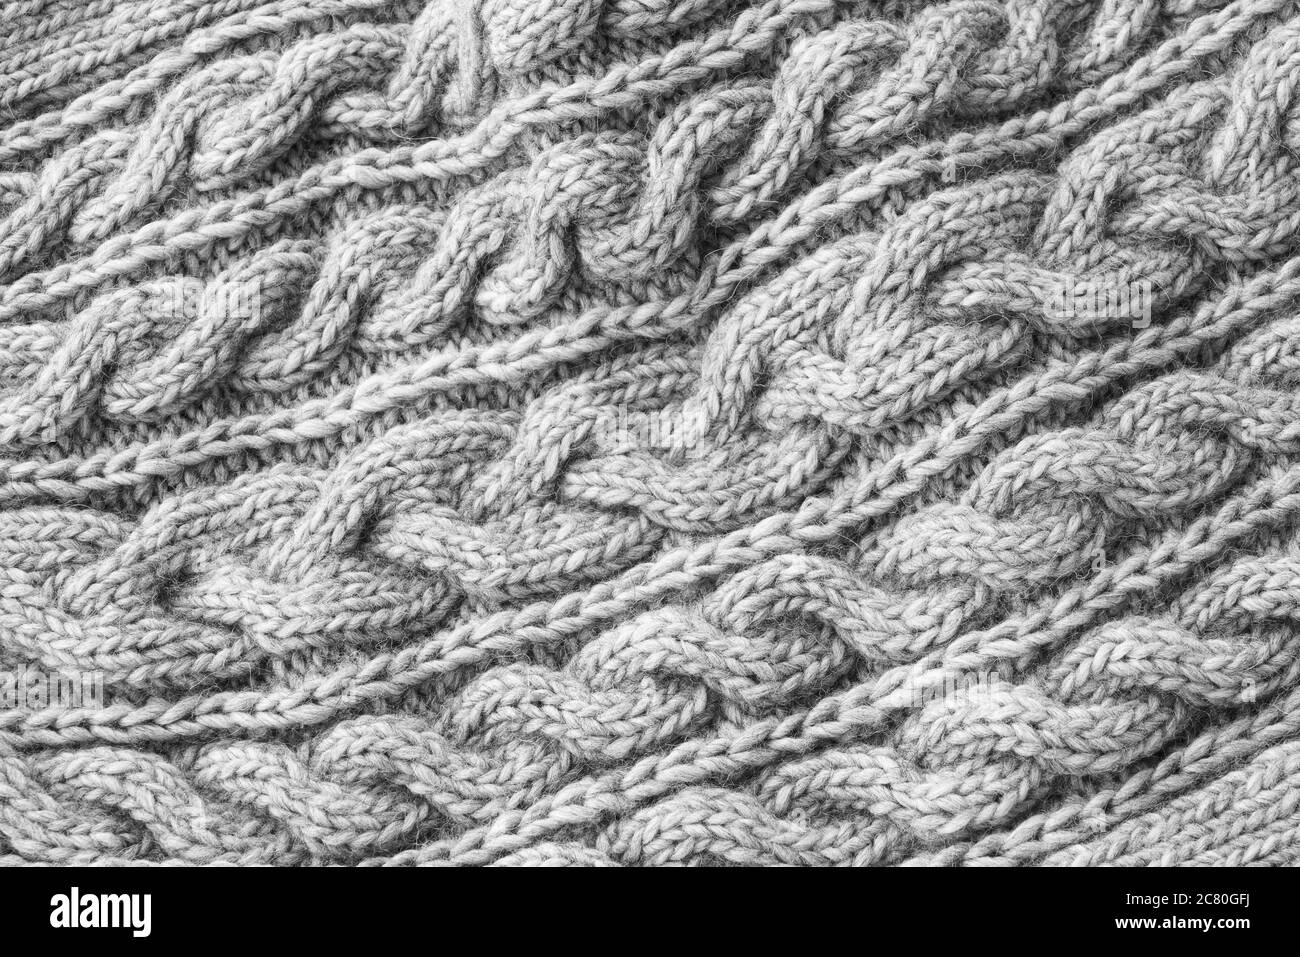 Gray knitted texture. Handmade Knitwear. Top view Stock Photo